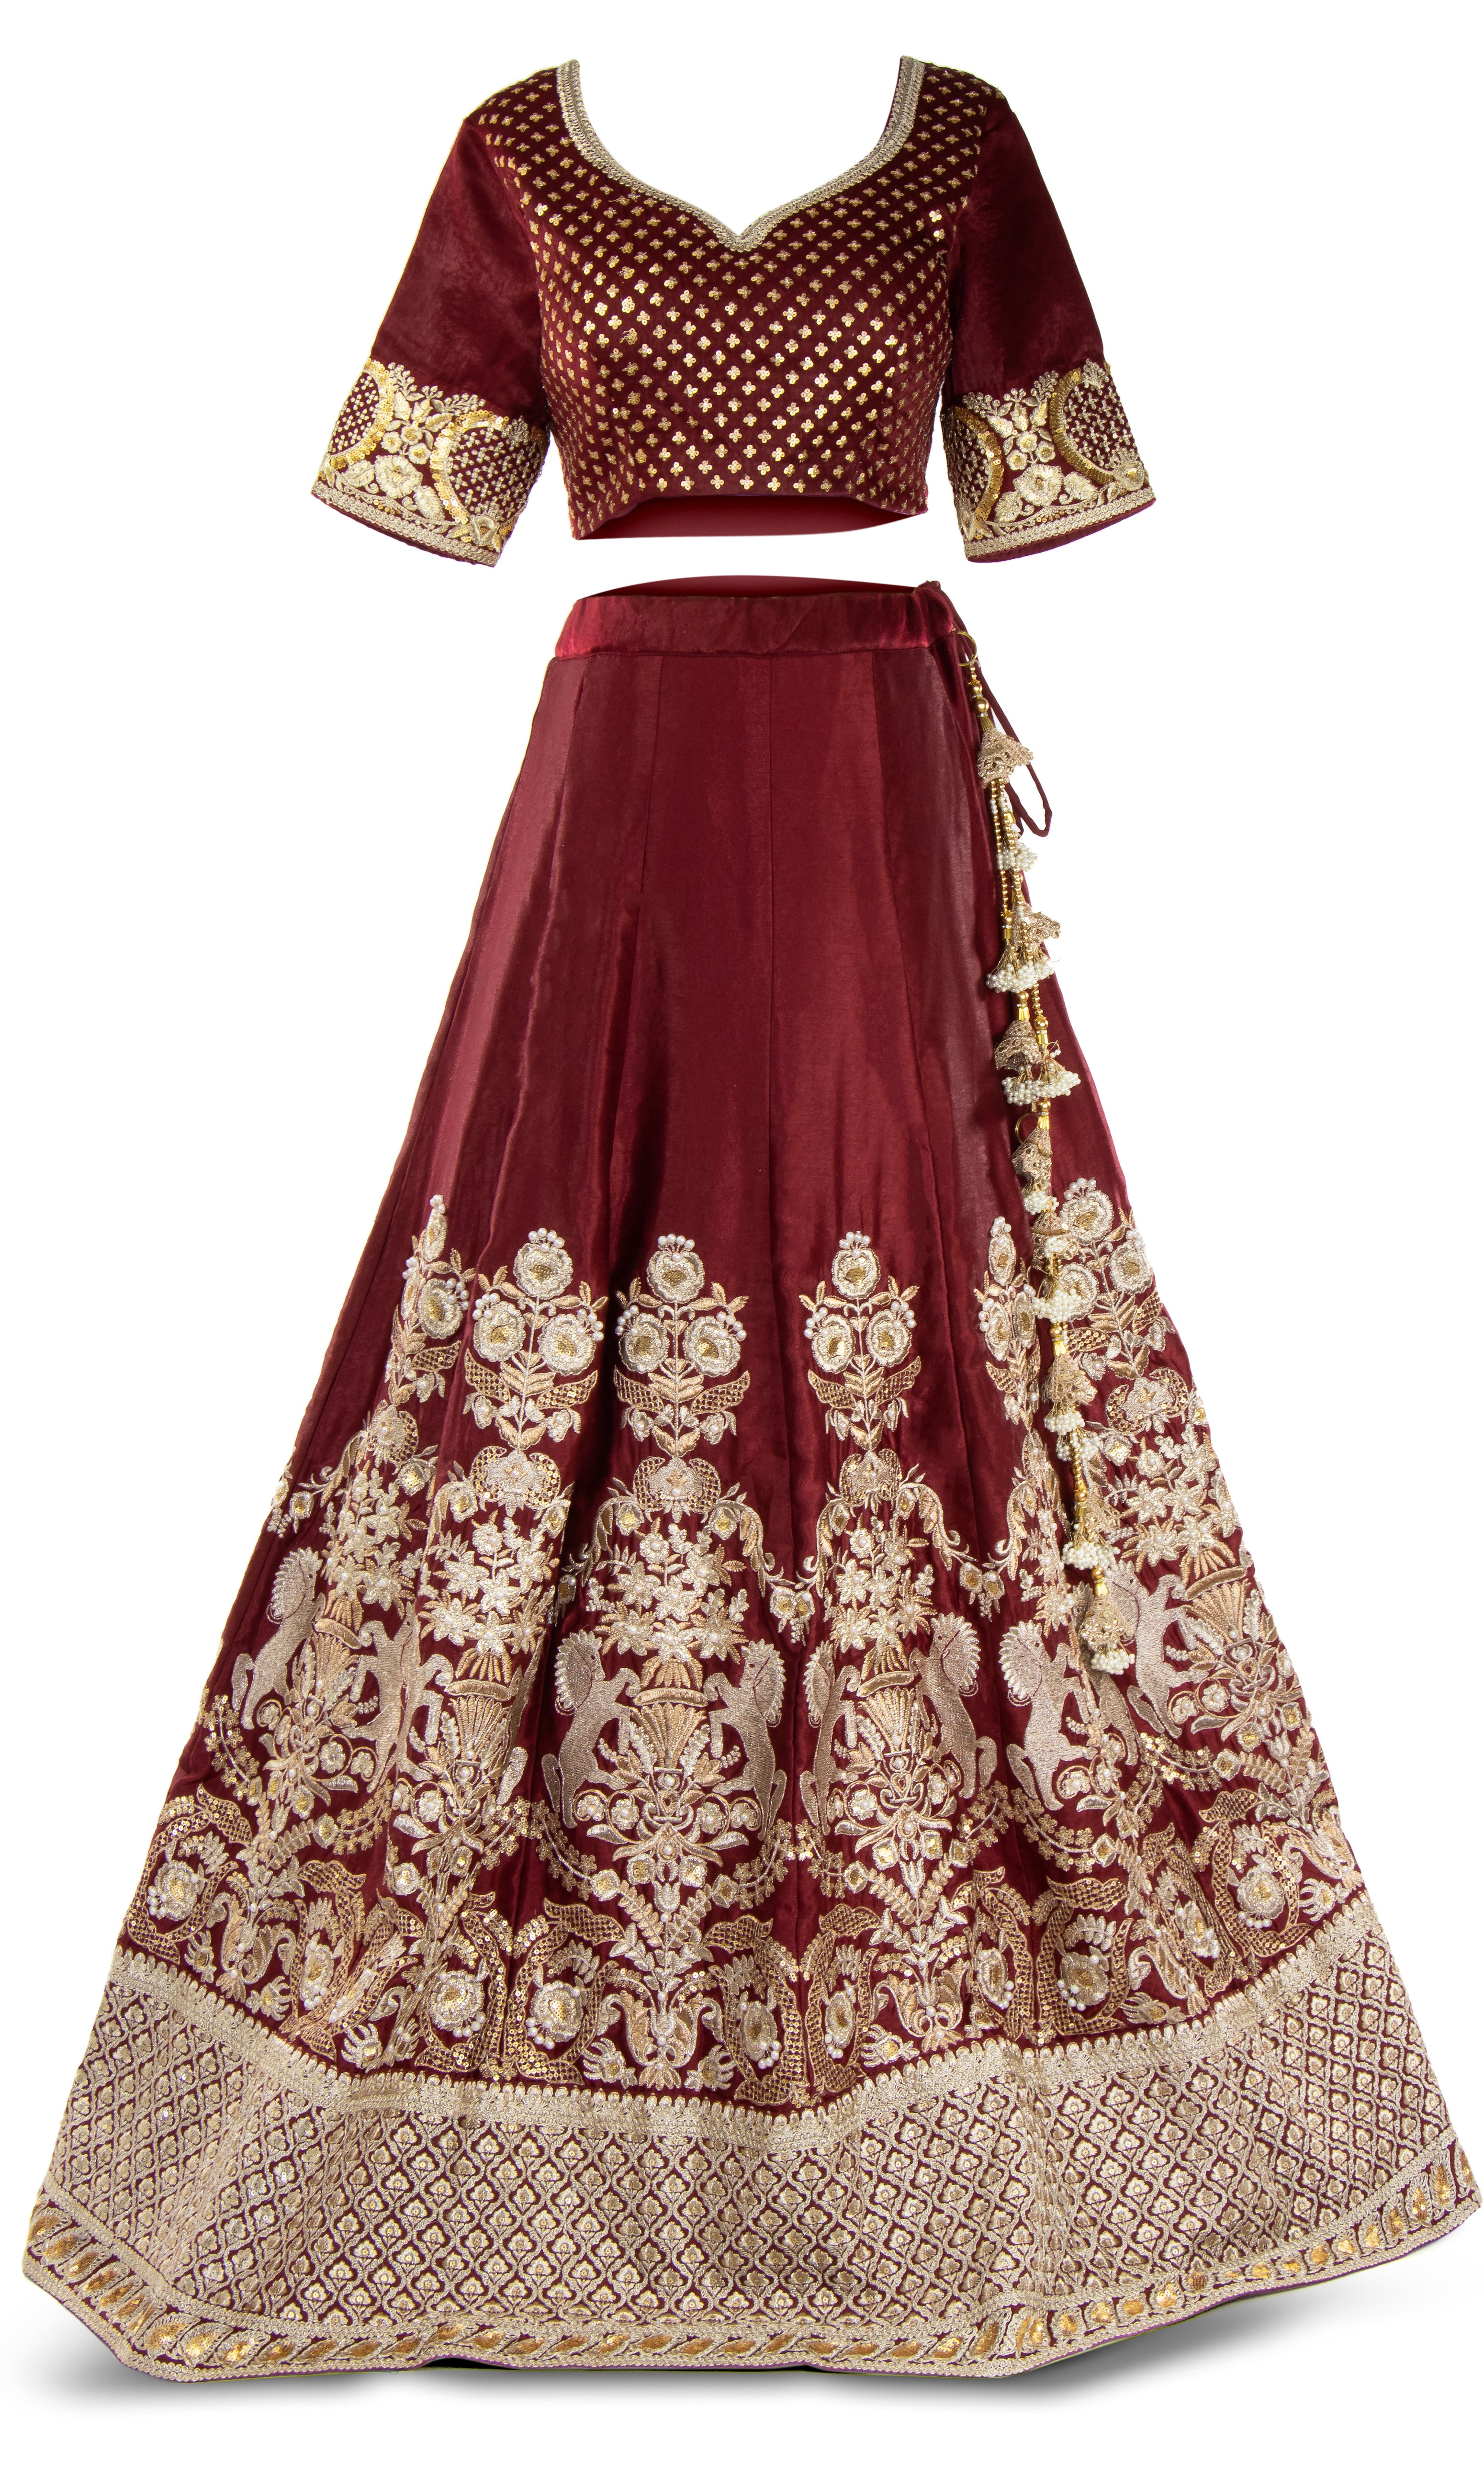 velvet top with maroon skirt adorned with the most regal gold embroidery